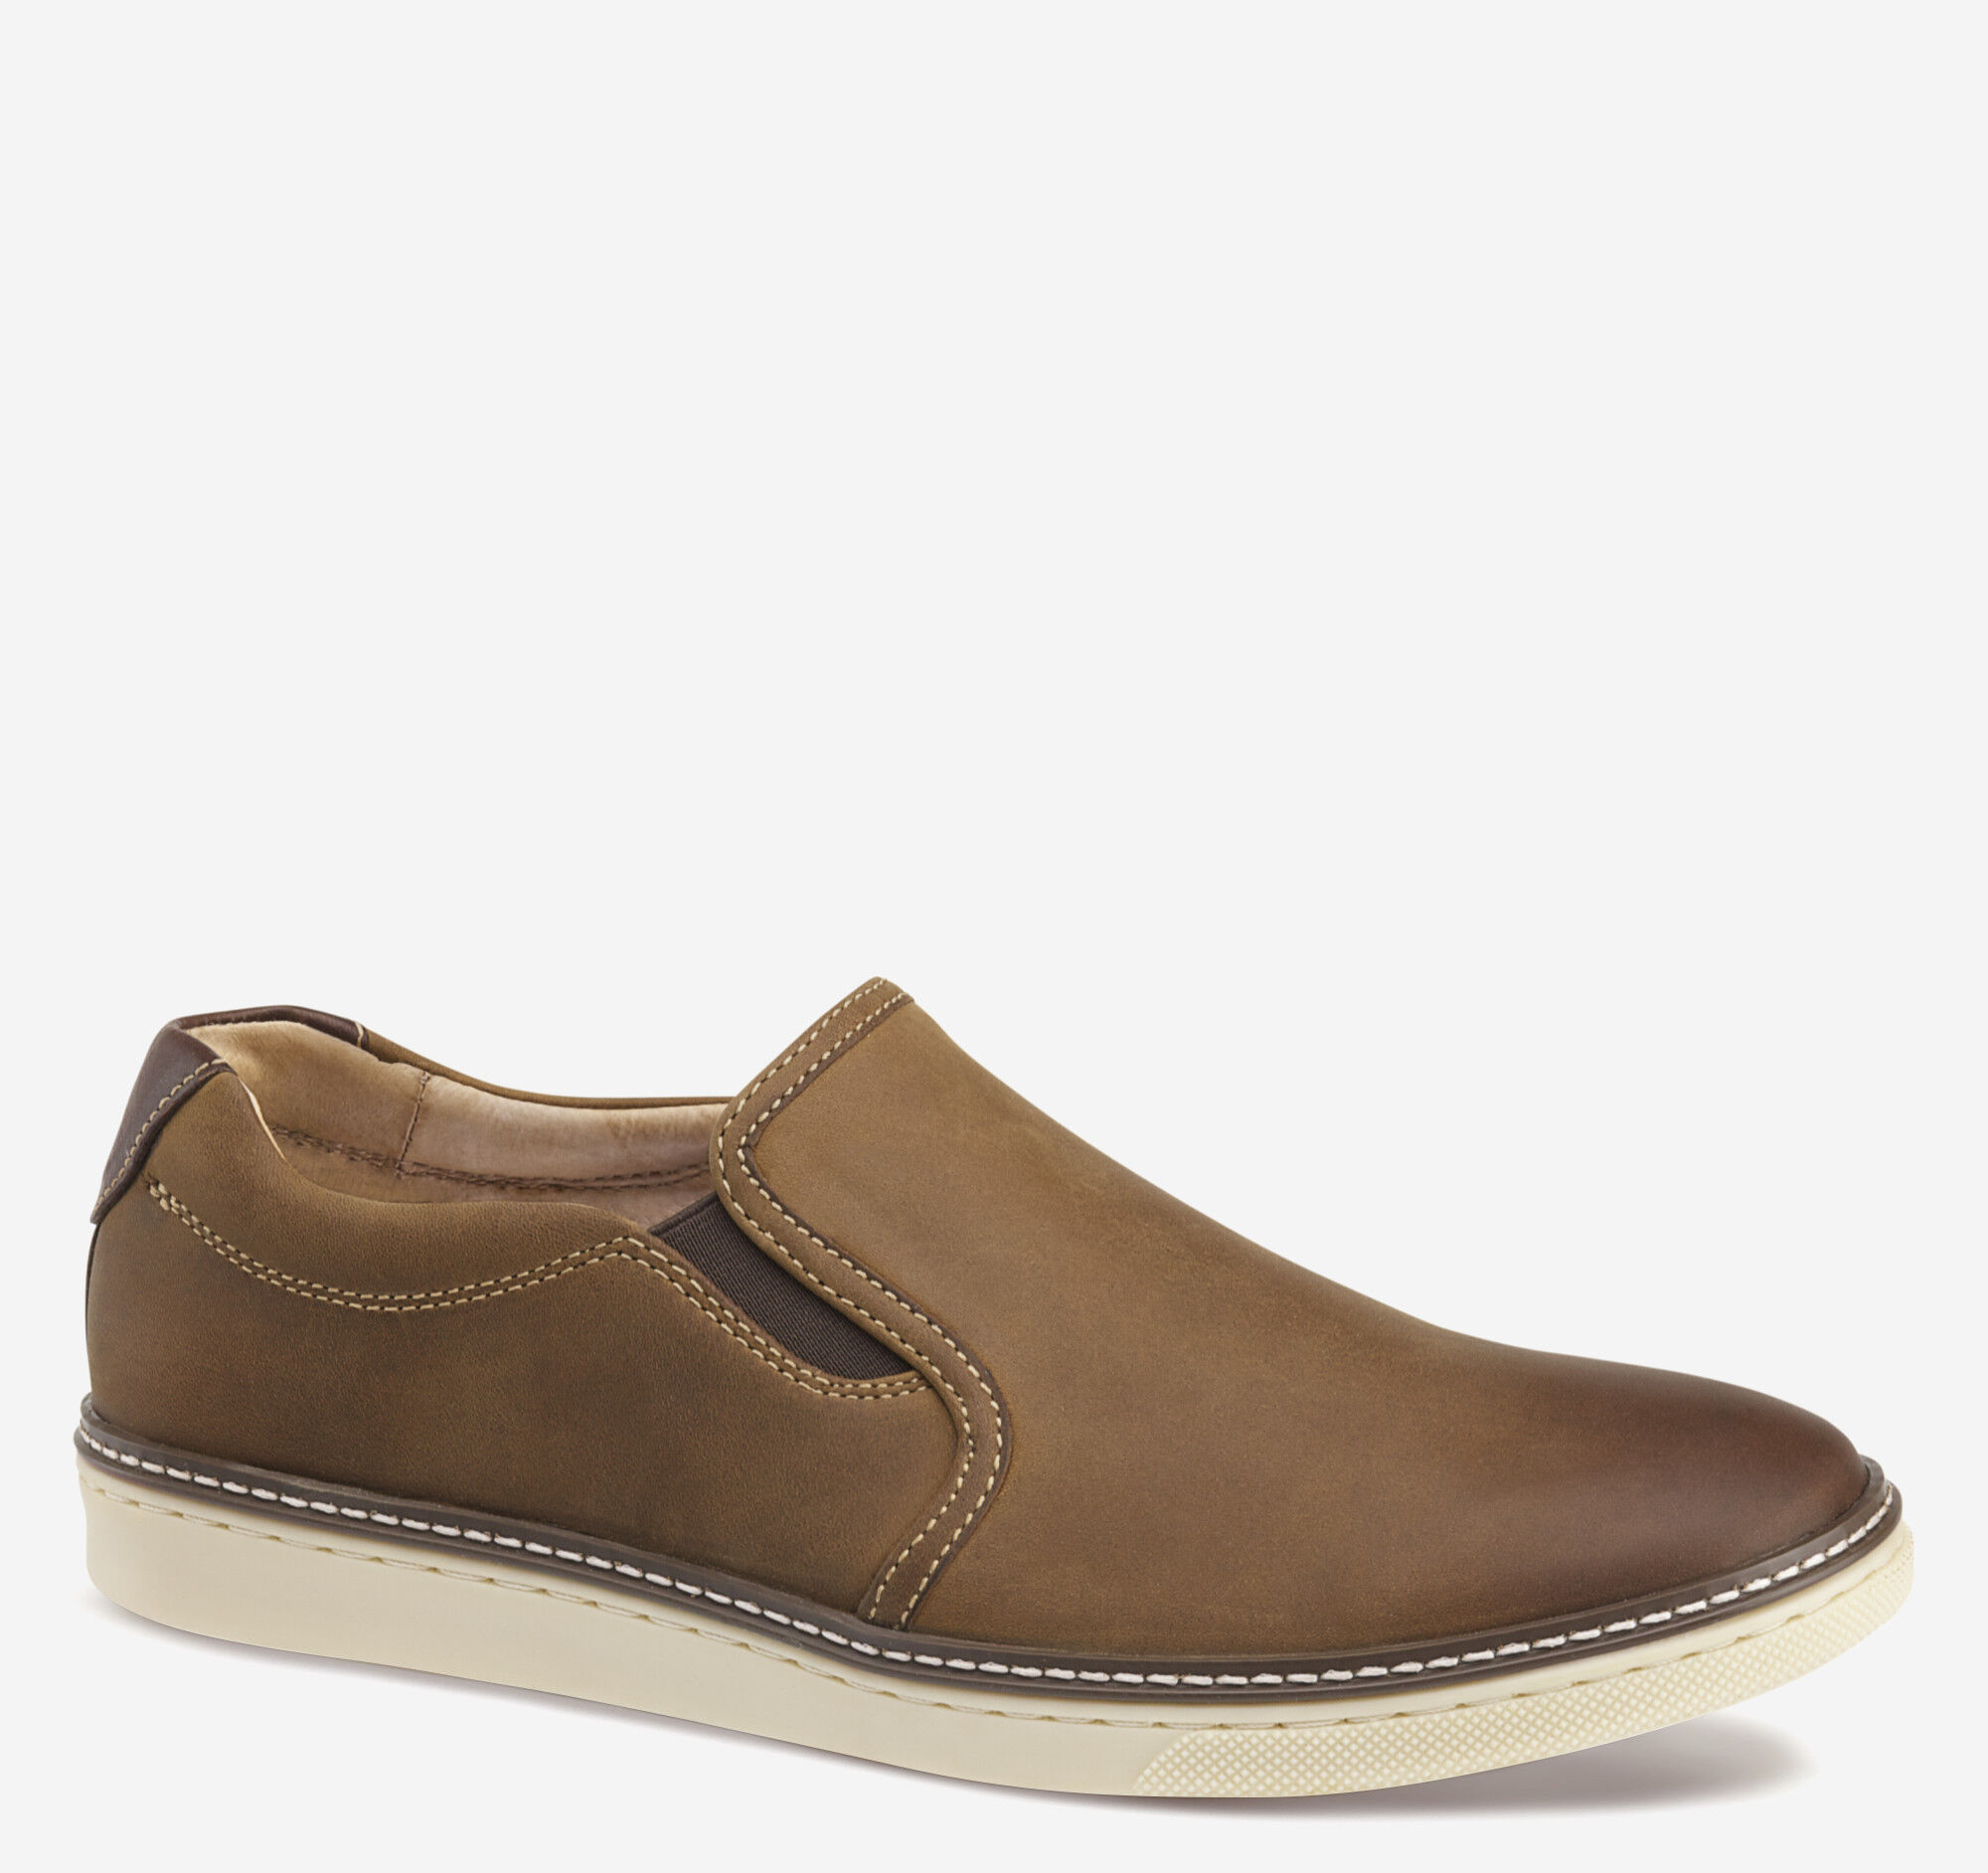 johnston and murphy slip on shoes